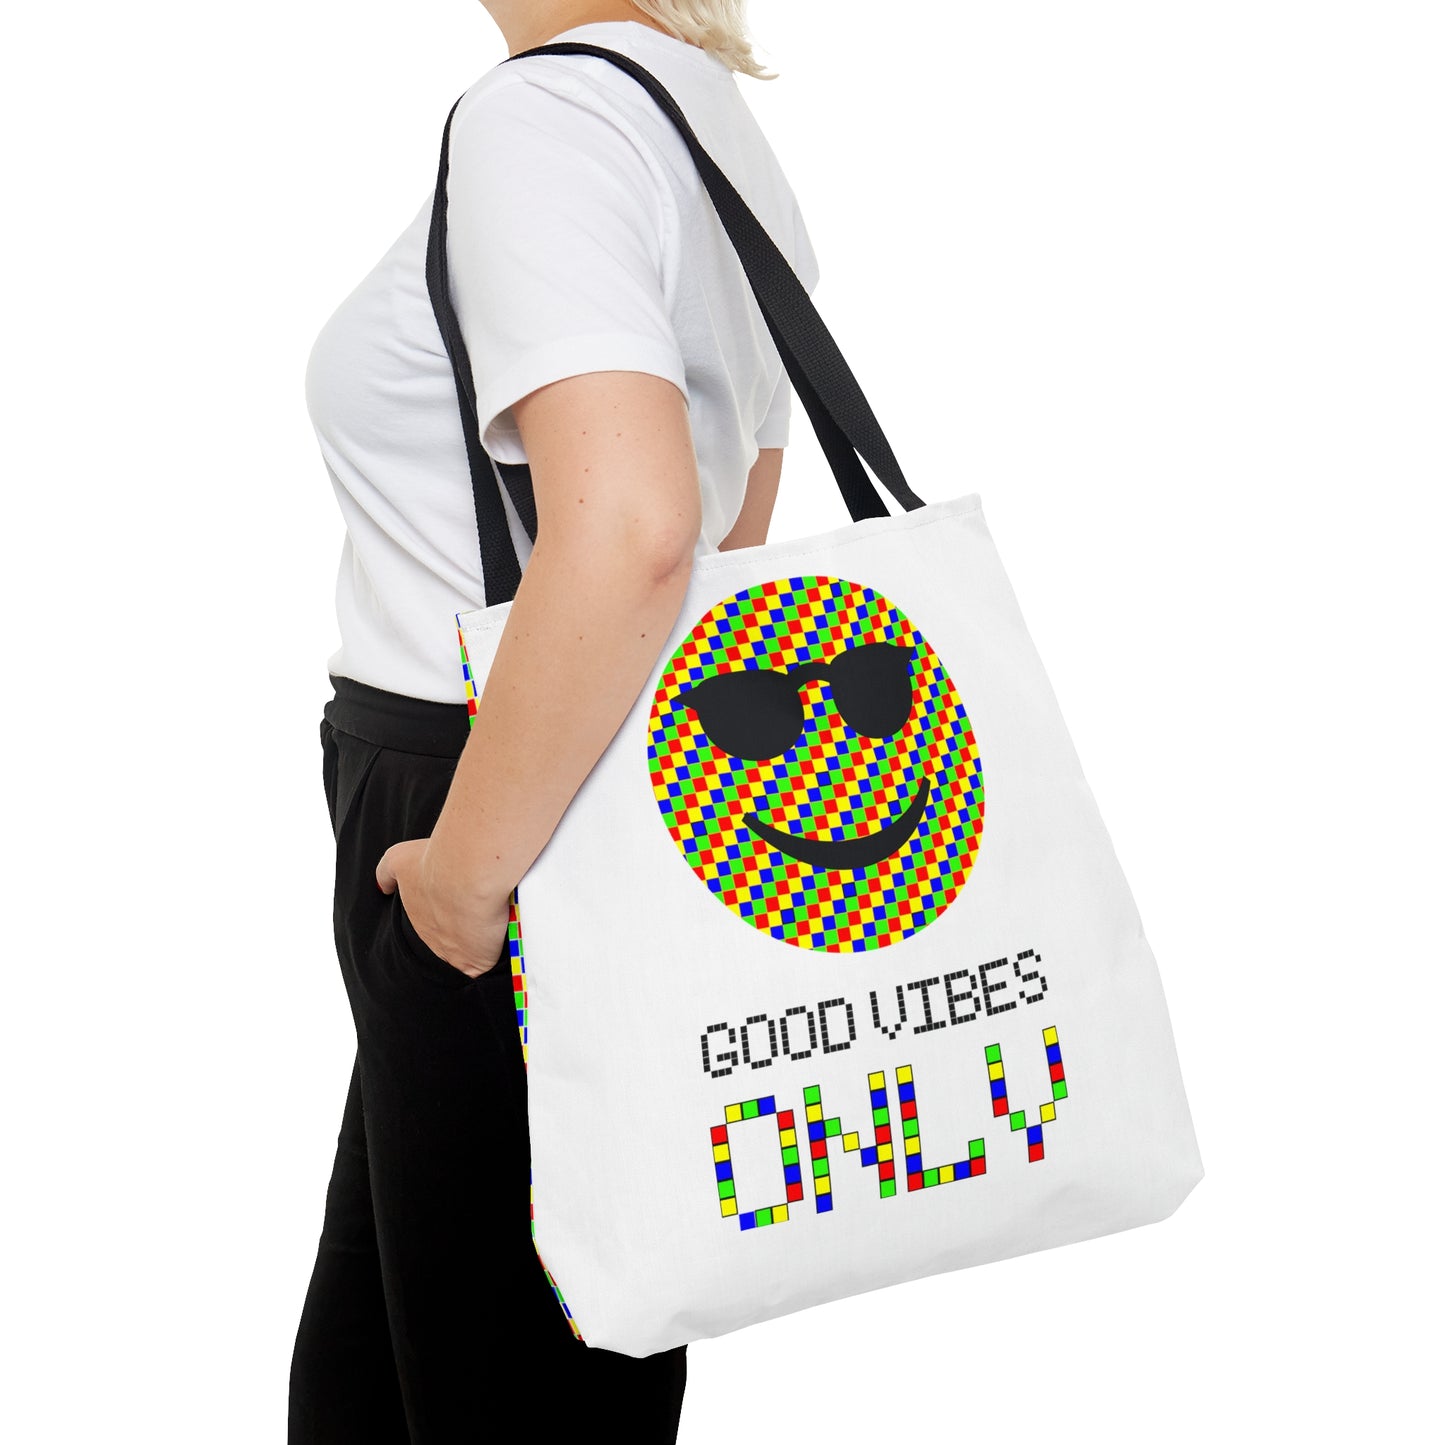 AOP Tote Bag "Good vibes ONLY"